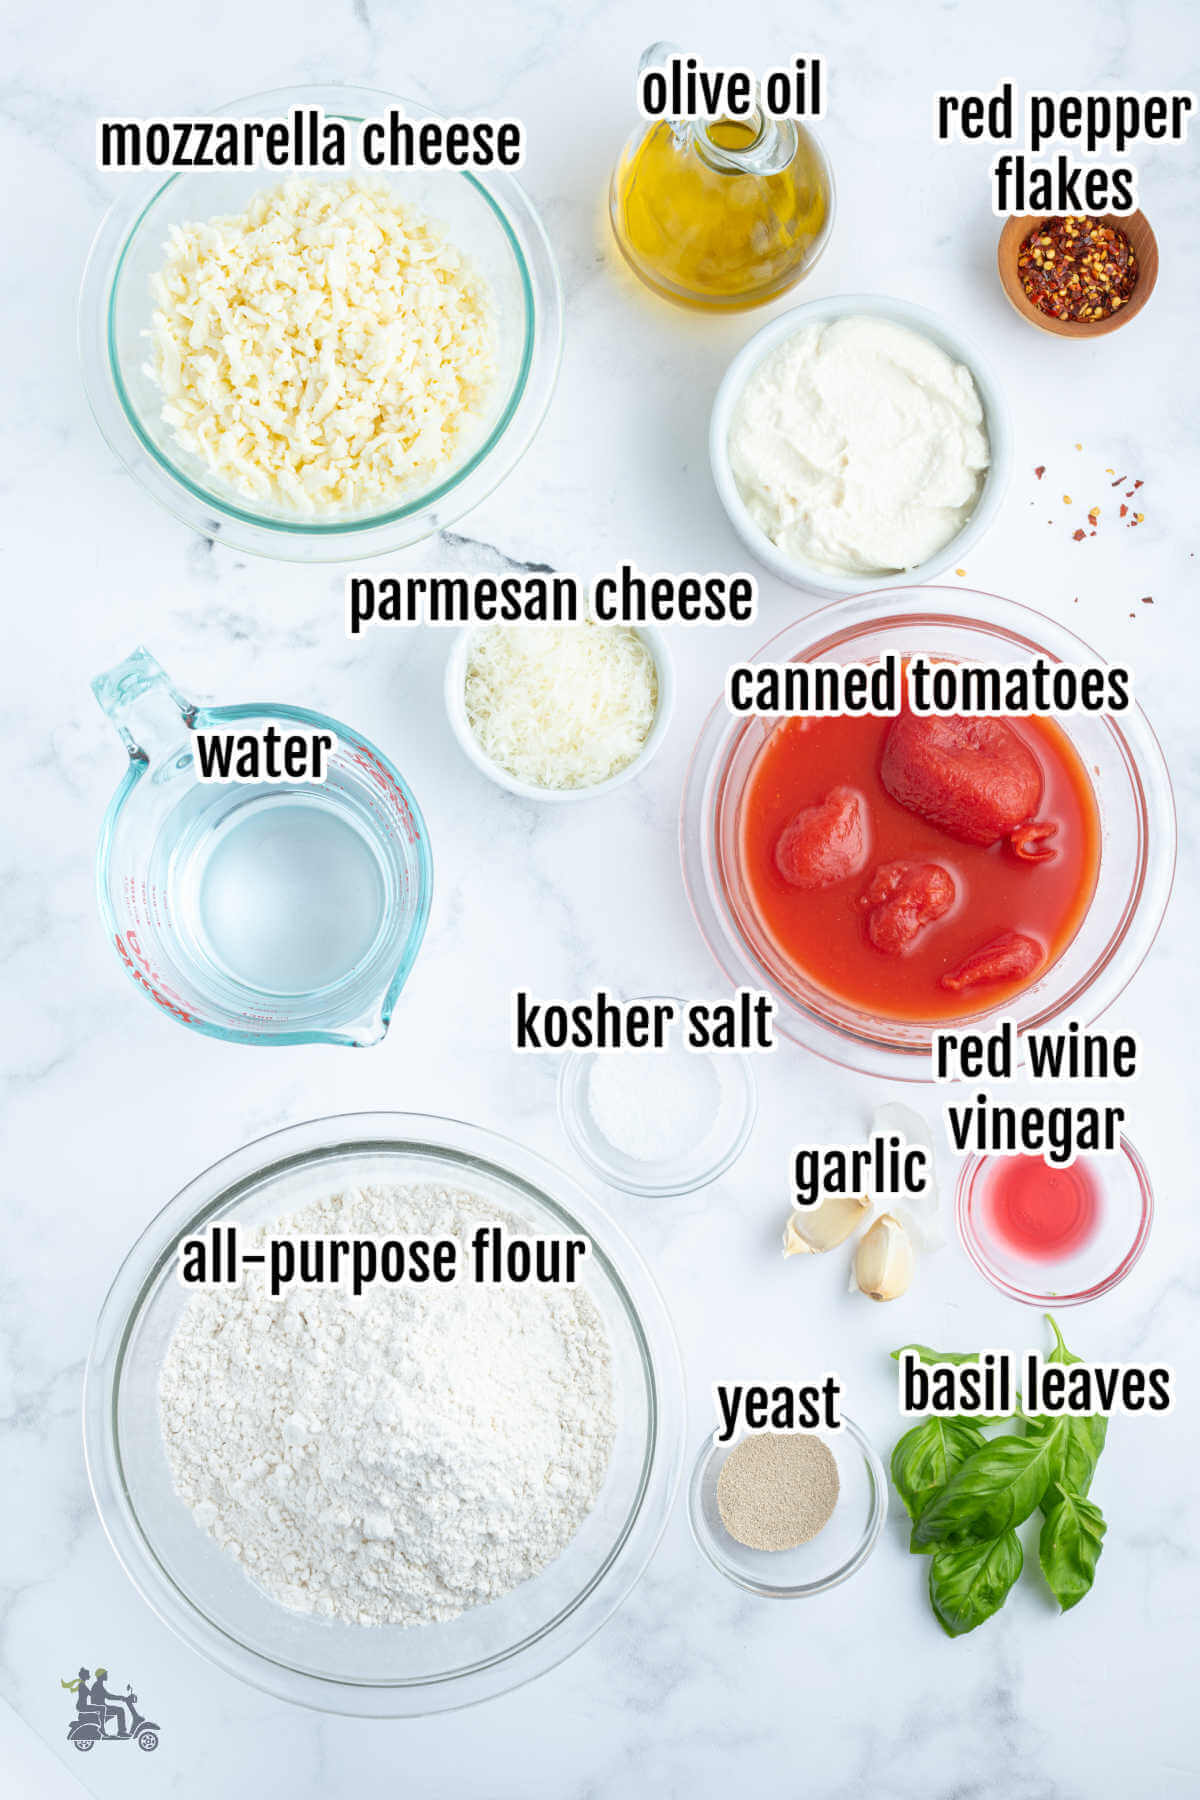 Image of the ingredients needed to making a focaccia into a pizza. 